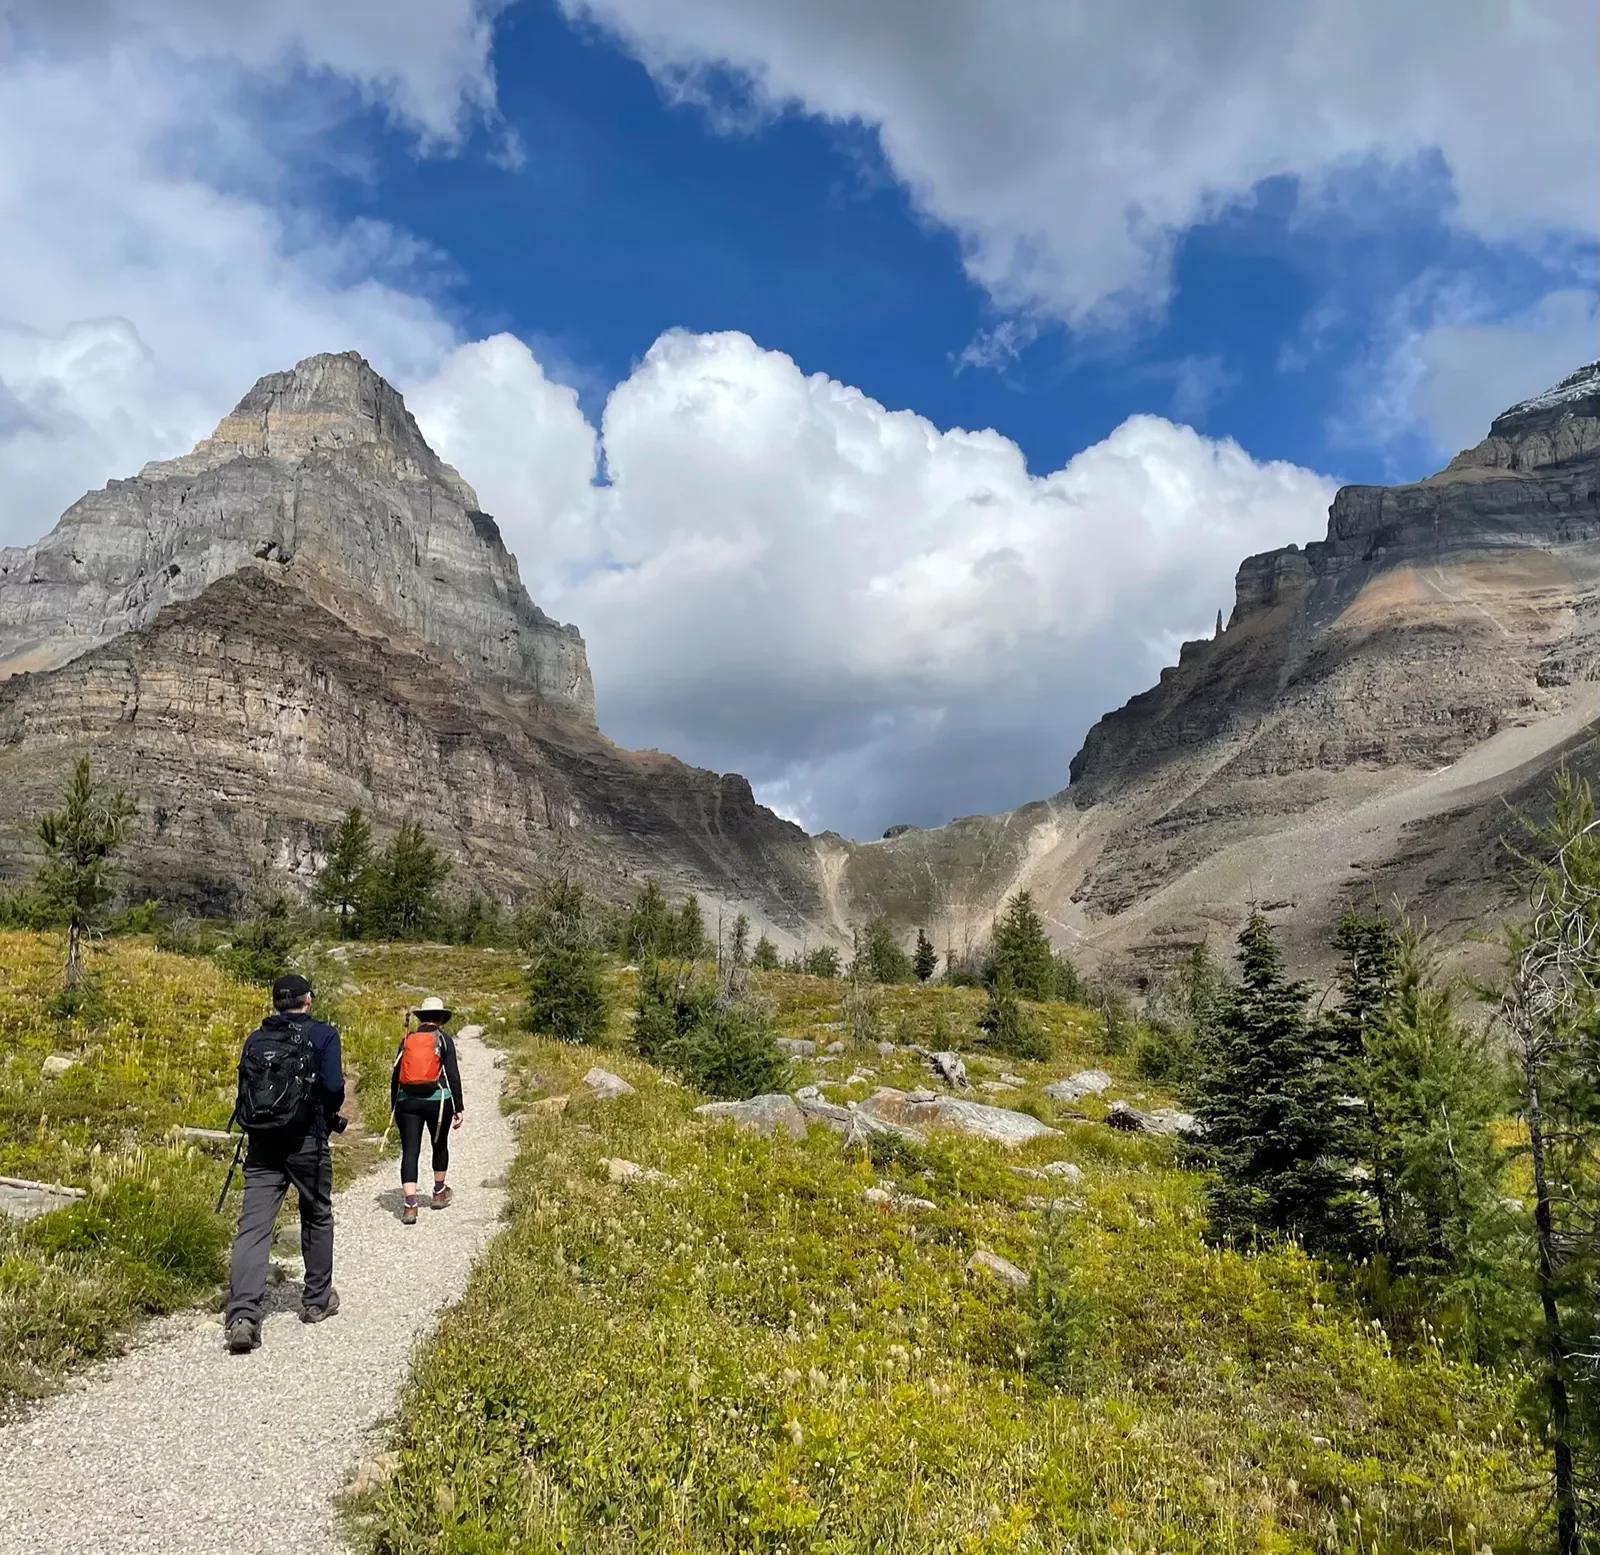 Two guests walking down meadow trail, two large mountain faces in distance.